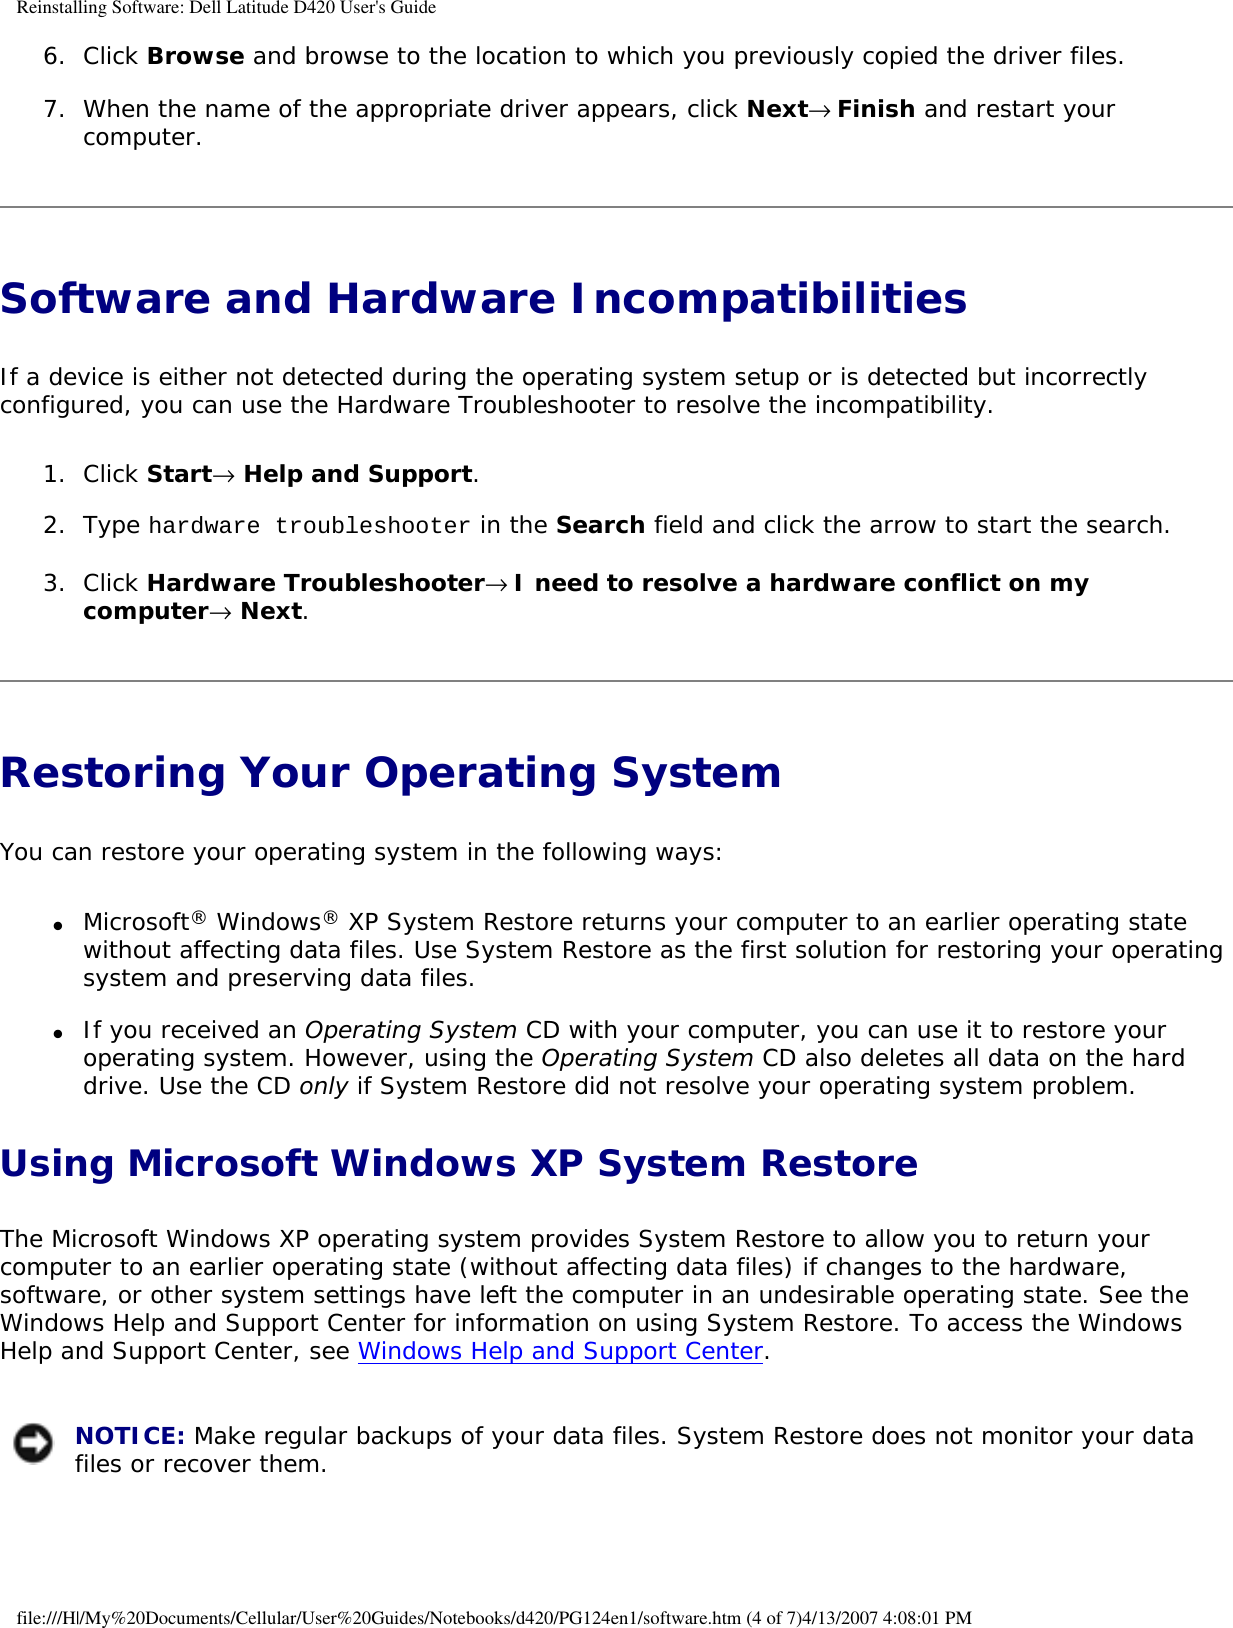 Reinstalling Software: Dell Latitude D420 User&apos;s Guide6.  Click Browse and browse to the location to which you previously copied the driver files.   7.  When the name of the appropriate driver appears, click Next→ Finish and restart your computer.   Software and Hardware Incompatibilities If a device is either not detected during the operating system setup or is detected but incorrectly configured, you can use the Hardware Troubleshooter to resolve the incompatibility.1.  Click Start→ Help and Support.   2.  Type hardware troubleshooter in the Search field and click the arrow to start the search.   3.  Click Hardware Troubleshooter→ I need to resolve a hardware conflict on my computer→ Next.   Restoring Your Operating System You can restore your operating system in the following ways:●     Microsoft® Windows® XP System Restore returns your computer to an earlier operating state without affecting data files. Use System Restore as the first solution for restoring your operating system and preserving data files.  ●     If you received an Operating System CD with your computer, you can use it to restore your operating system. However, using the Operating System CD also deletes all data on the hard drive. Use the CD only if System Restore did not resolve your operating system problem.  Using Microsoft Windows XP System RestoreThe Microsoft Windows XP operating system provides System Restore to allow you to return your computer to an earlier operating state (without affecting data files) if changes to the hardware, software, or other system settings have left the computer in an undesirable operating state. See the Windows Help and Support Center for information on using System Restore. To access the Windows Help and Support Center, see Windows Help and Support Center. NOTICE: Make regular backups of your data files. System Restore does not monitor your data files or recover them. file:///H|/My%20Documents/Cellular/User%20Guides/Notebooks/d420/PG124en1/software.htm (4 of 7)4/13/2007 4:08:01 PM